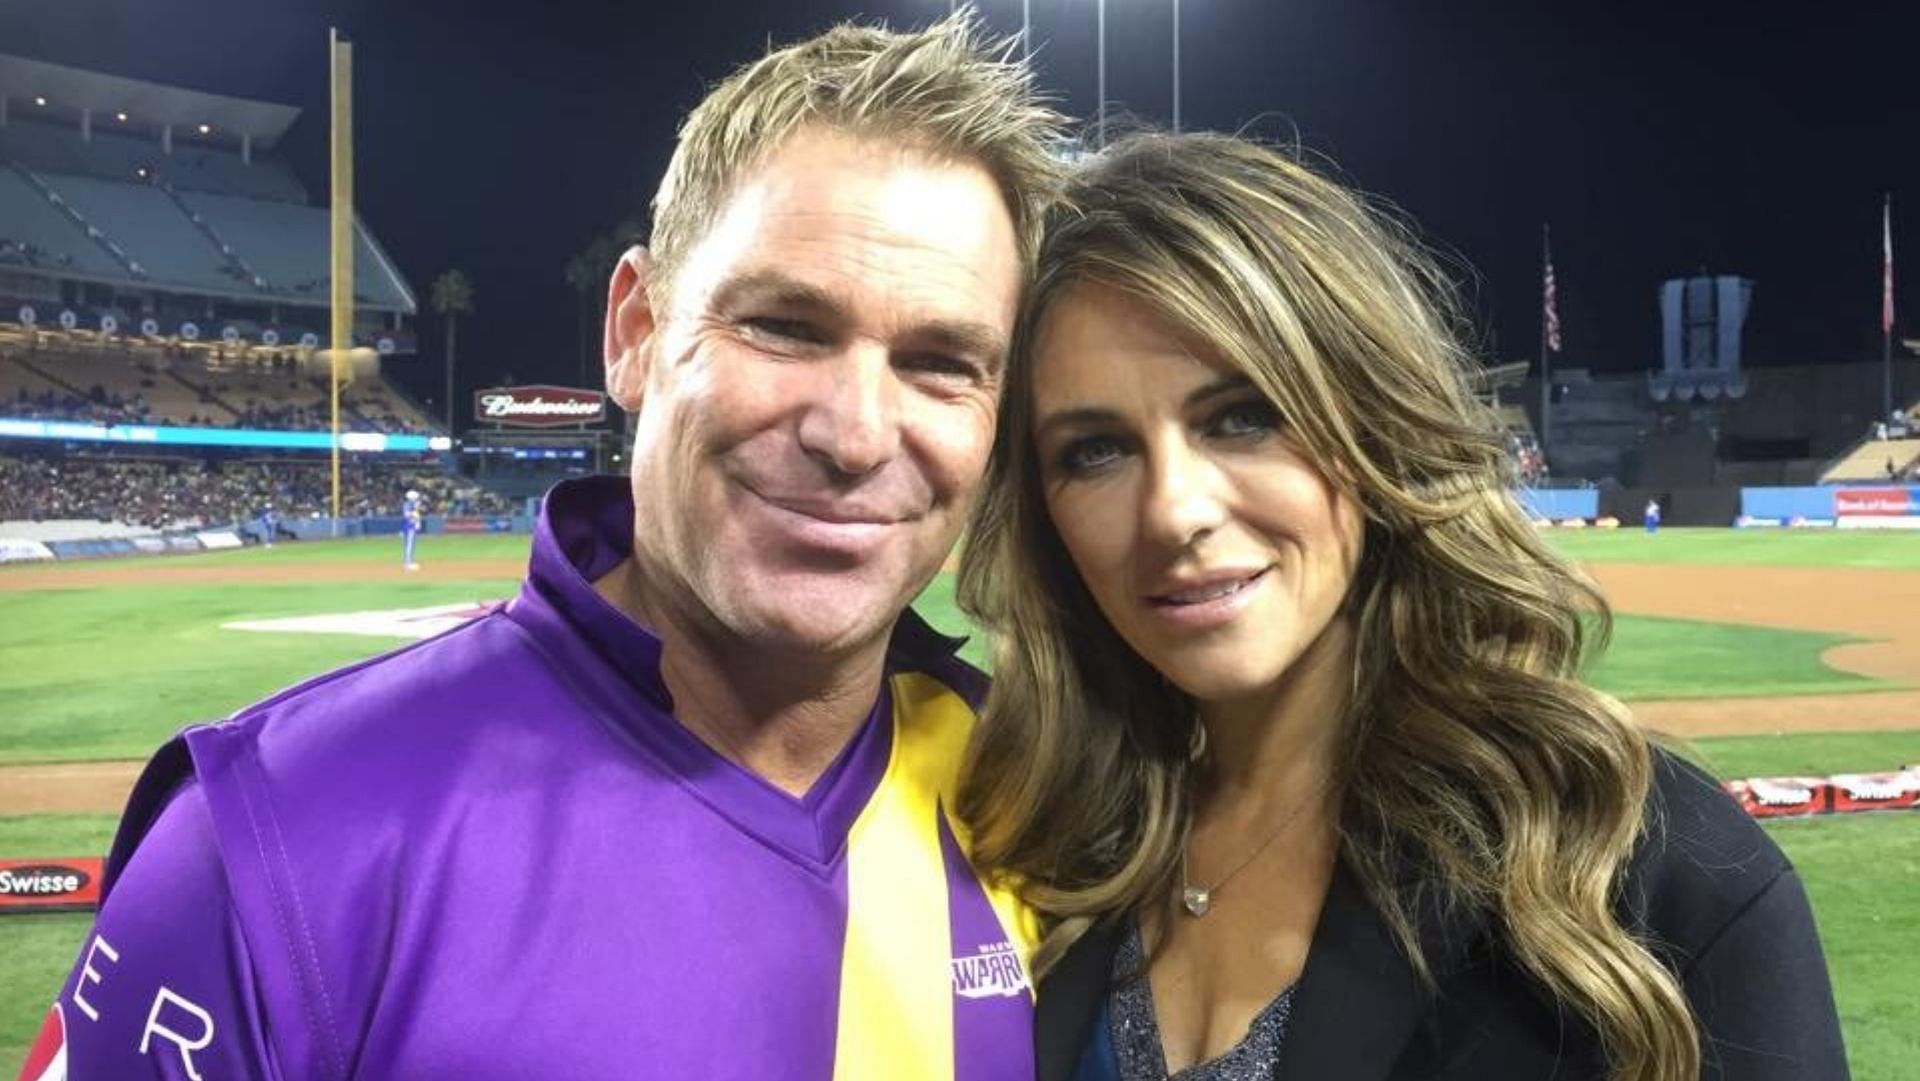 Elizabeth Hurley was engaged to Shane Warne from 2011 to 2013. (Image via @xtratimeindia/Twitter)